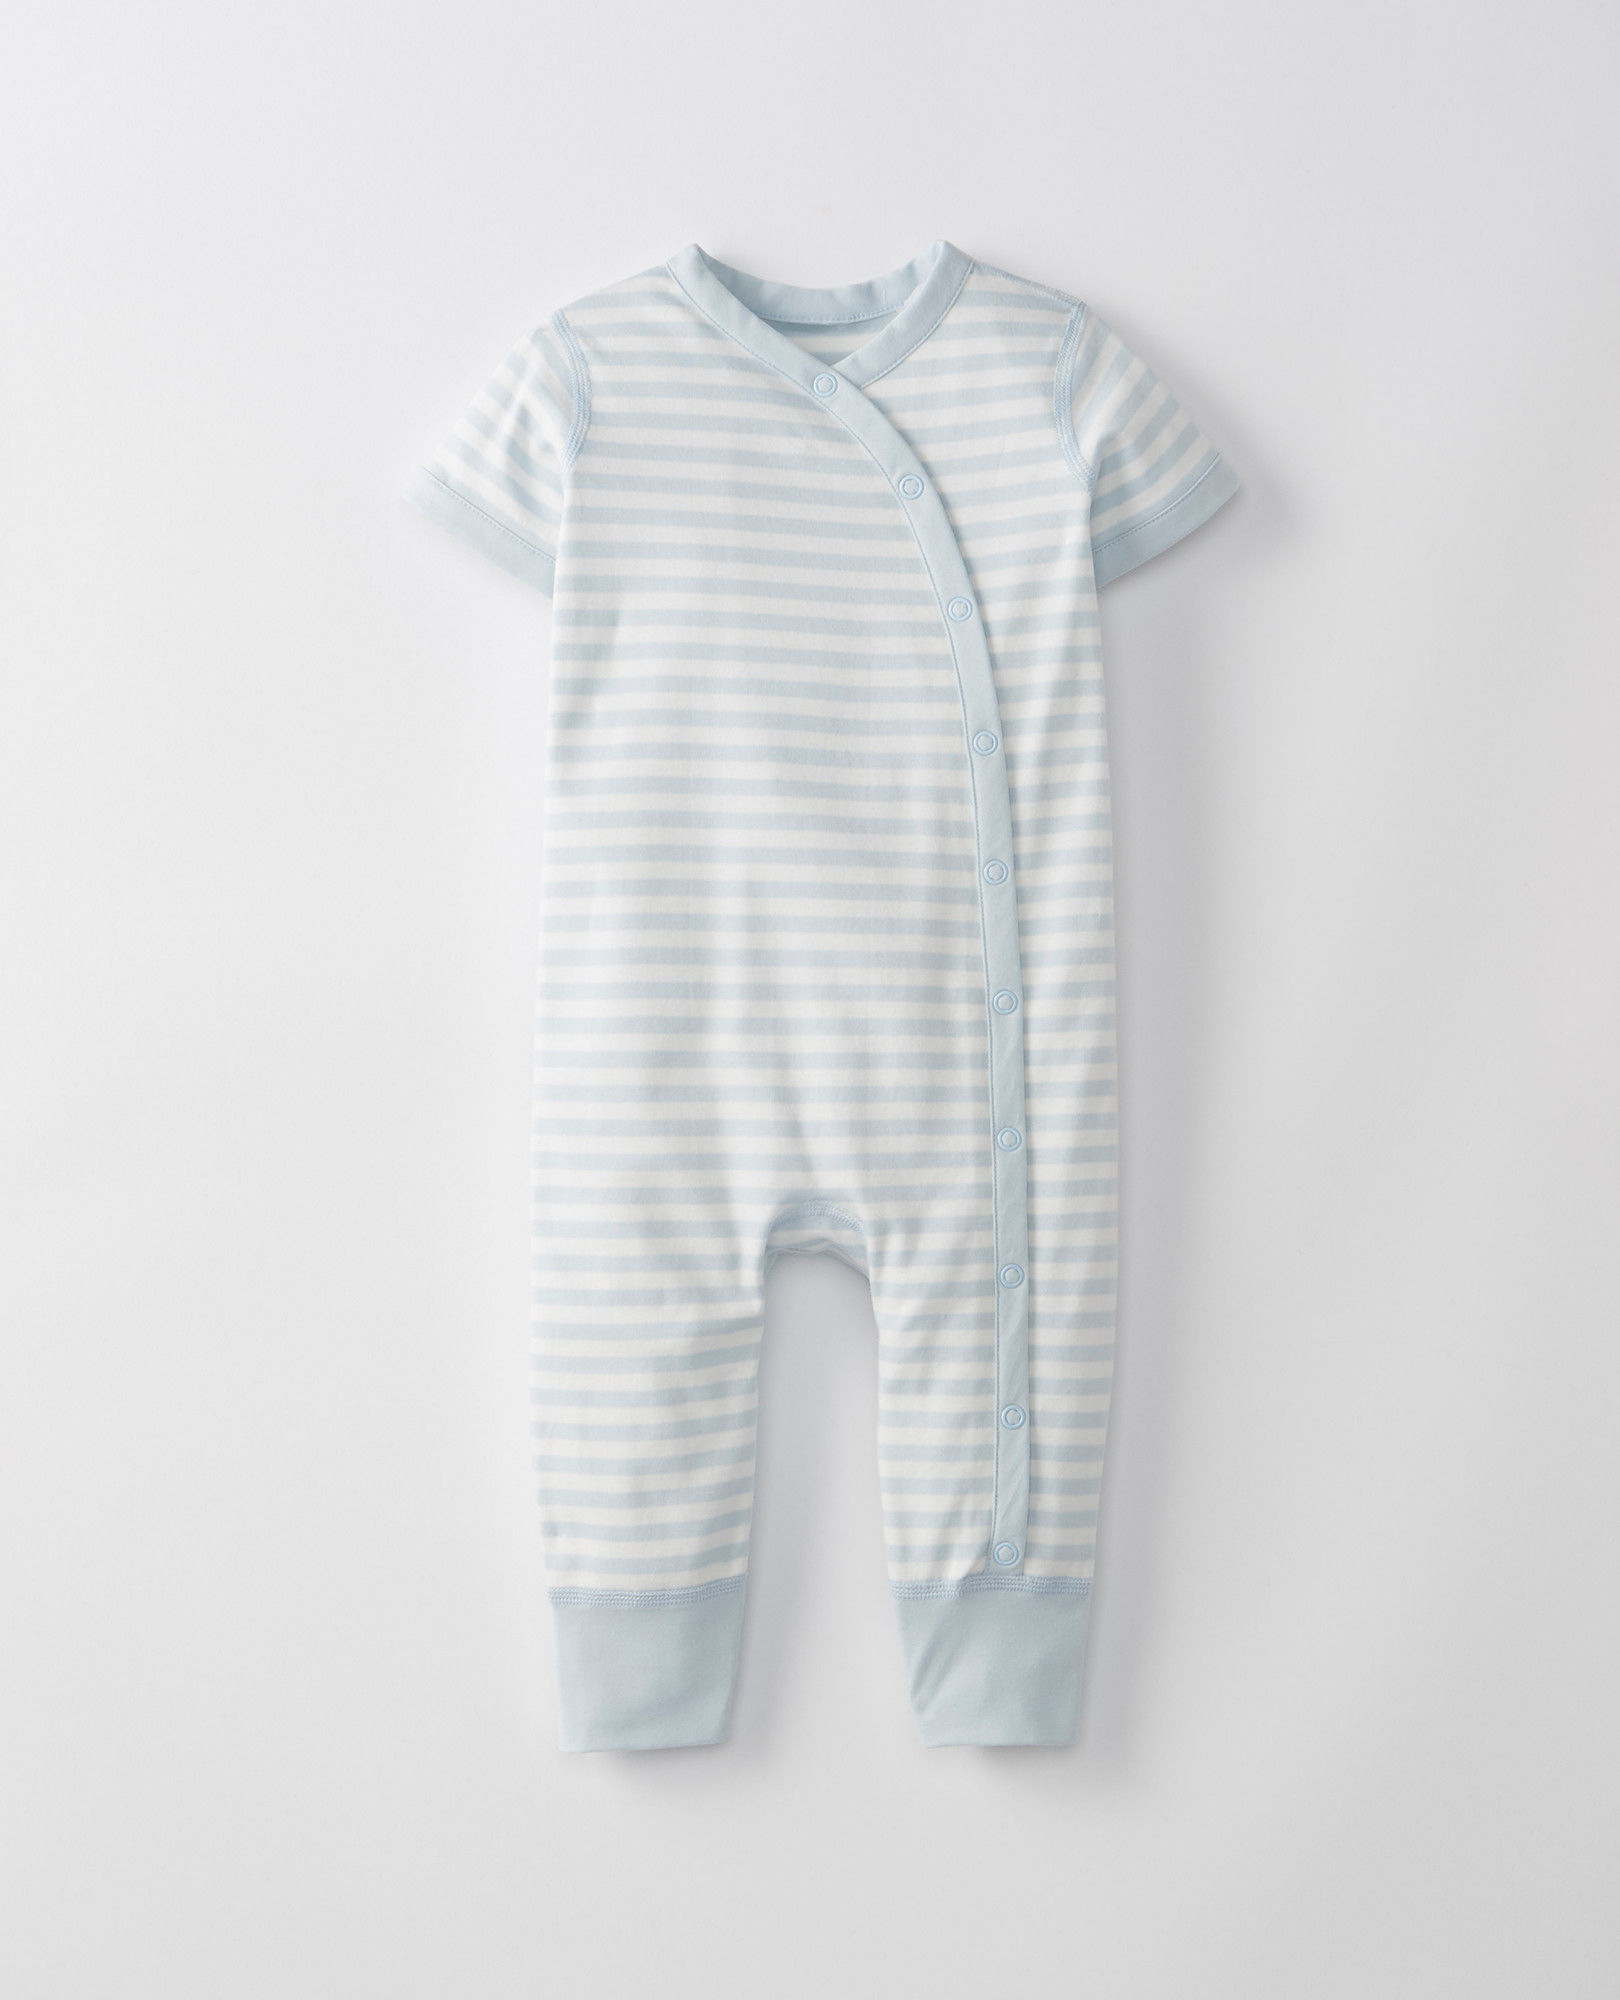 Baby Boy One Piece Outfits | Hanna Andersson